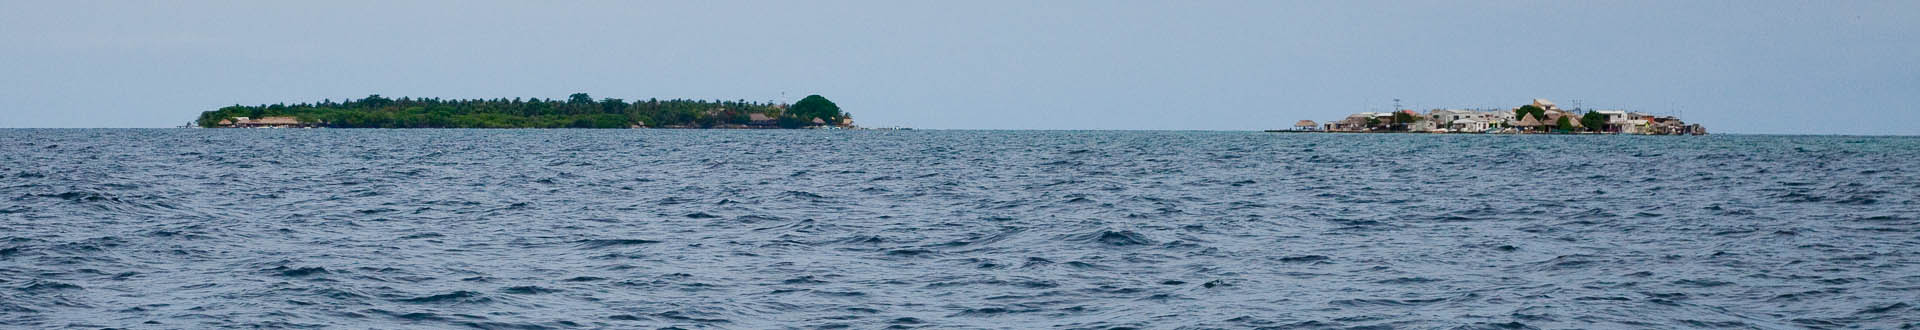 View of the Island Islote with Mucura